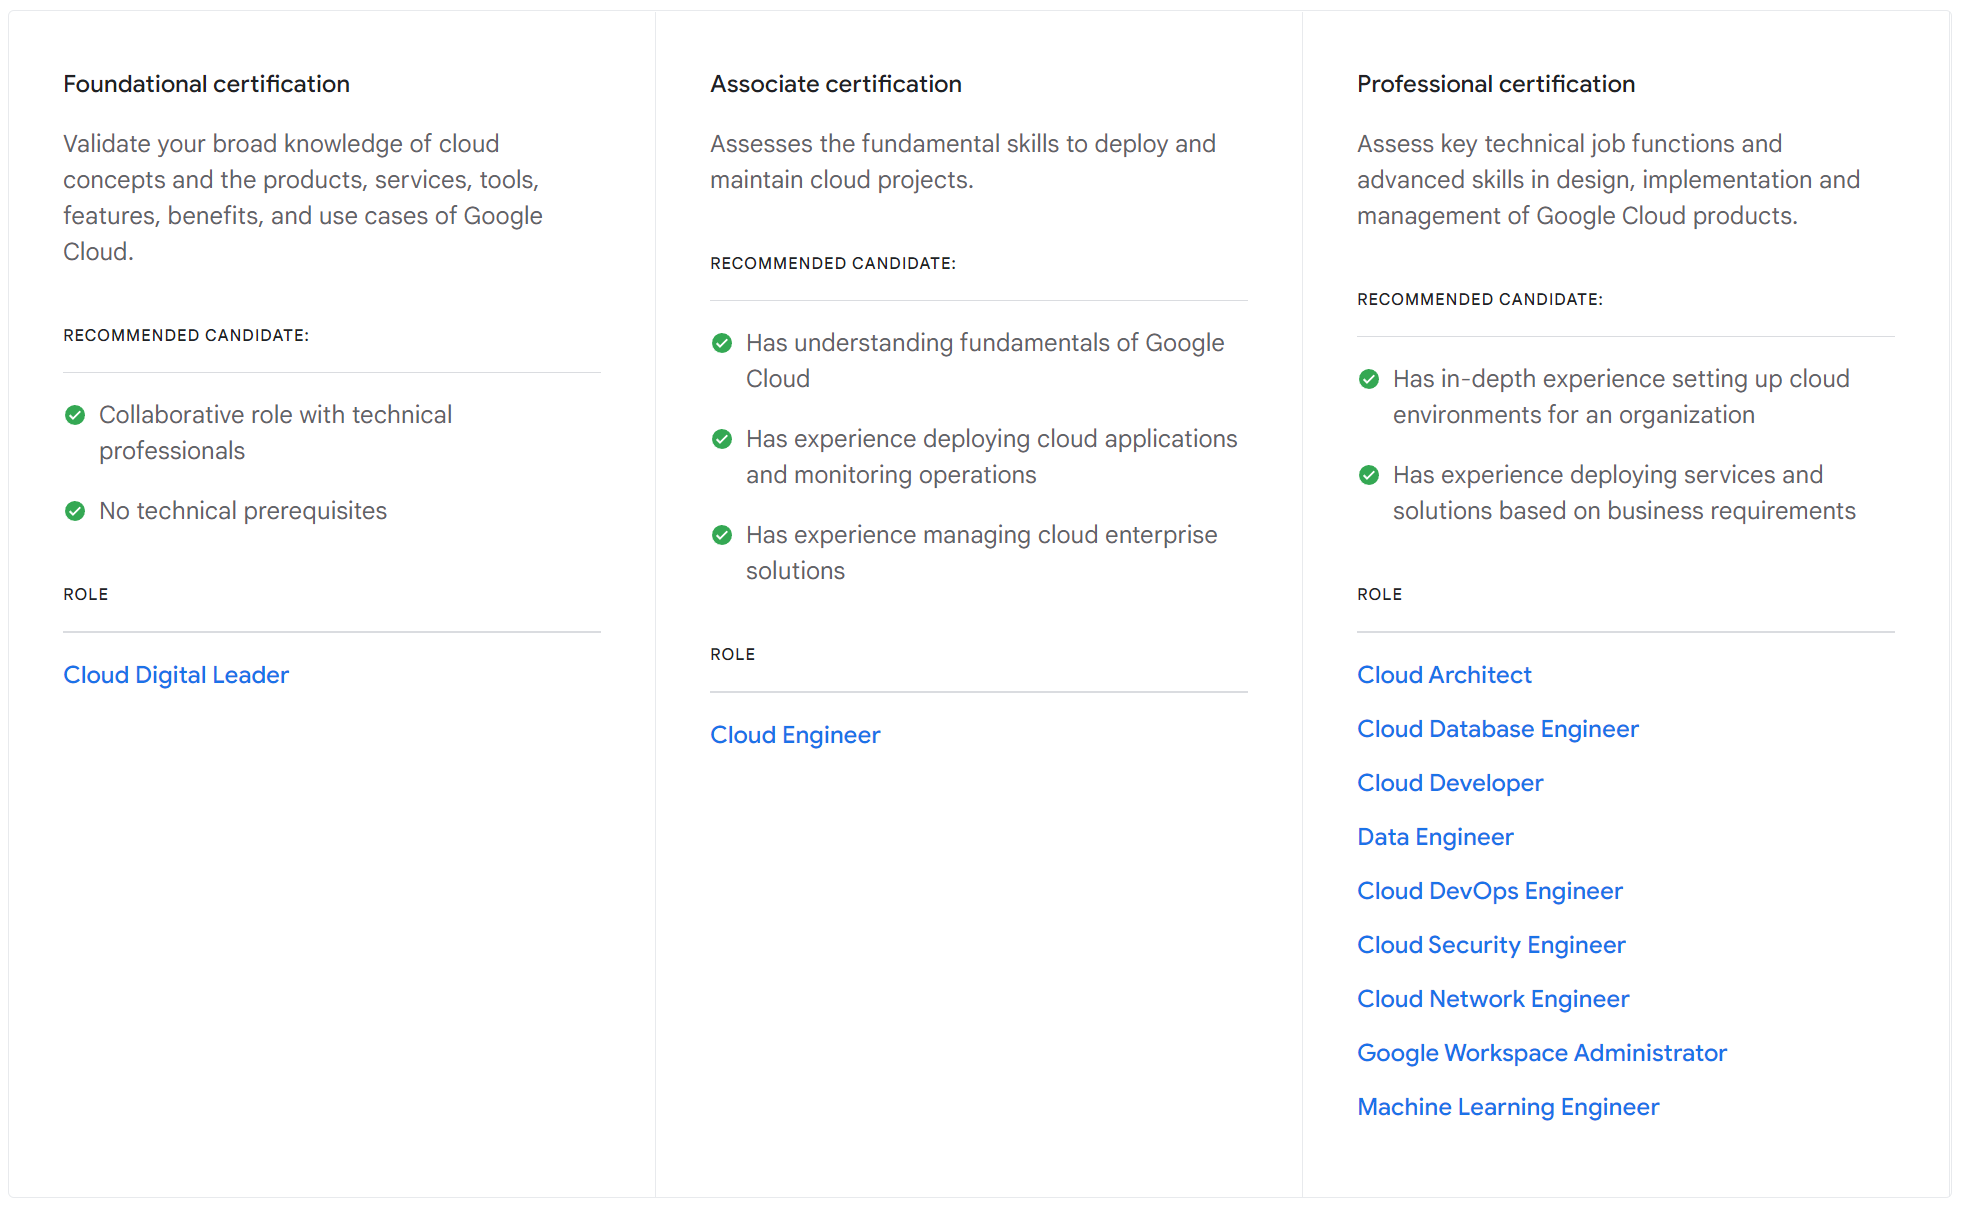 The Professional level is the most challenging one among Google Cloud certificates.